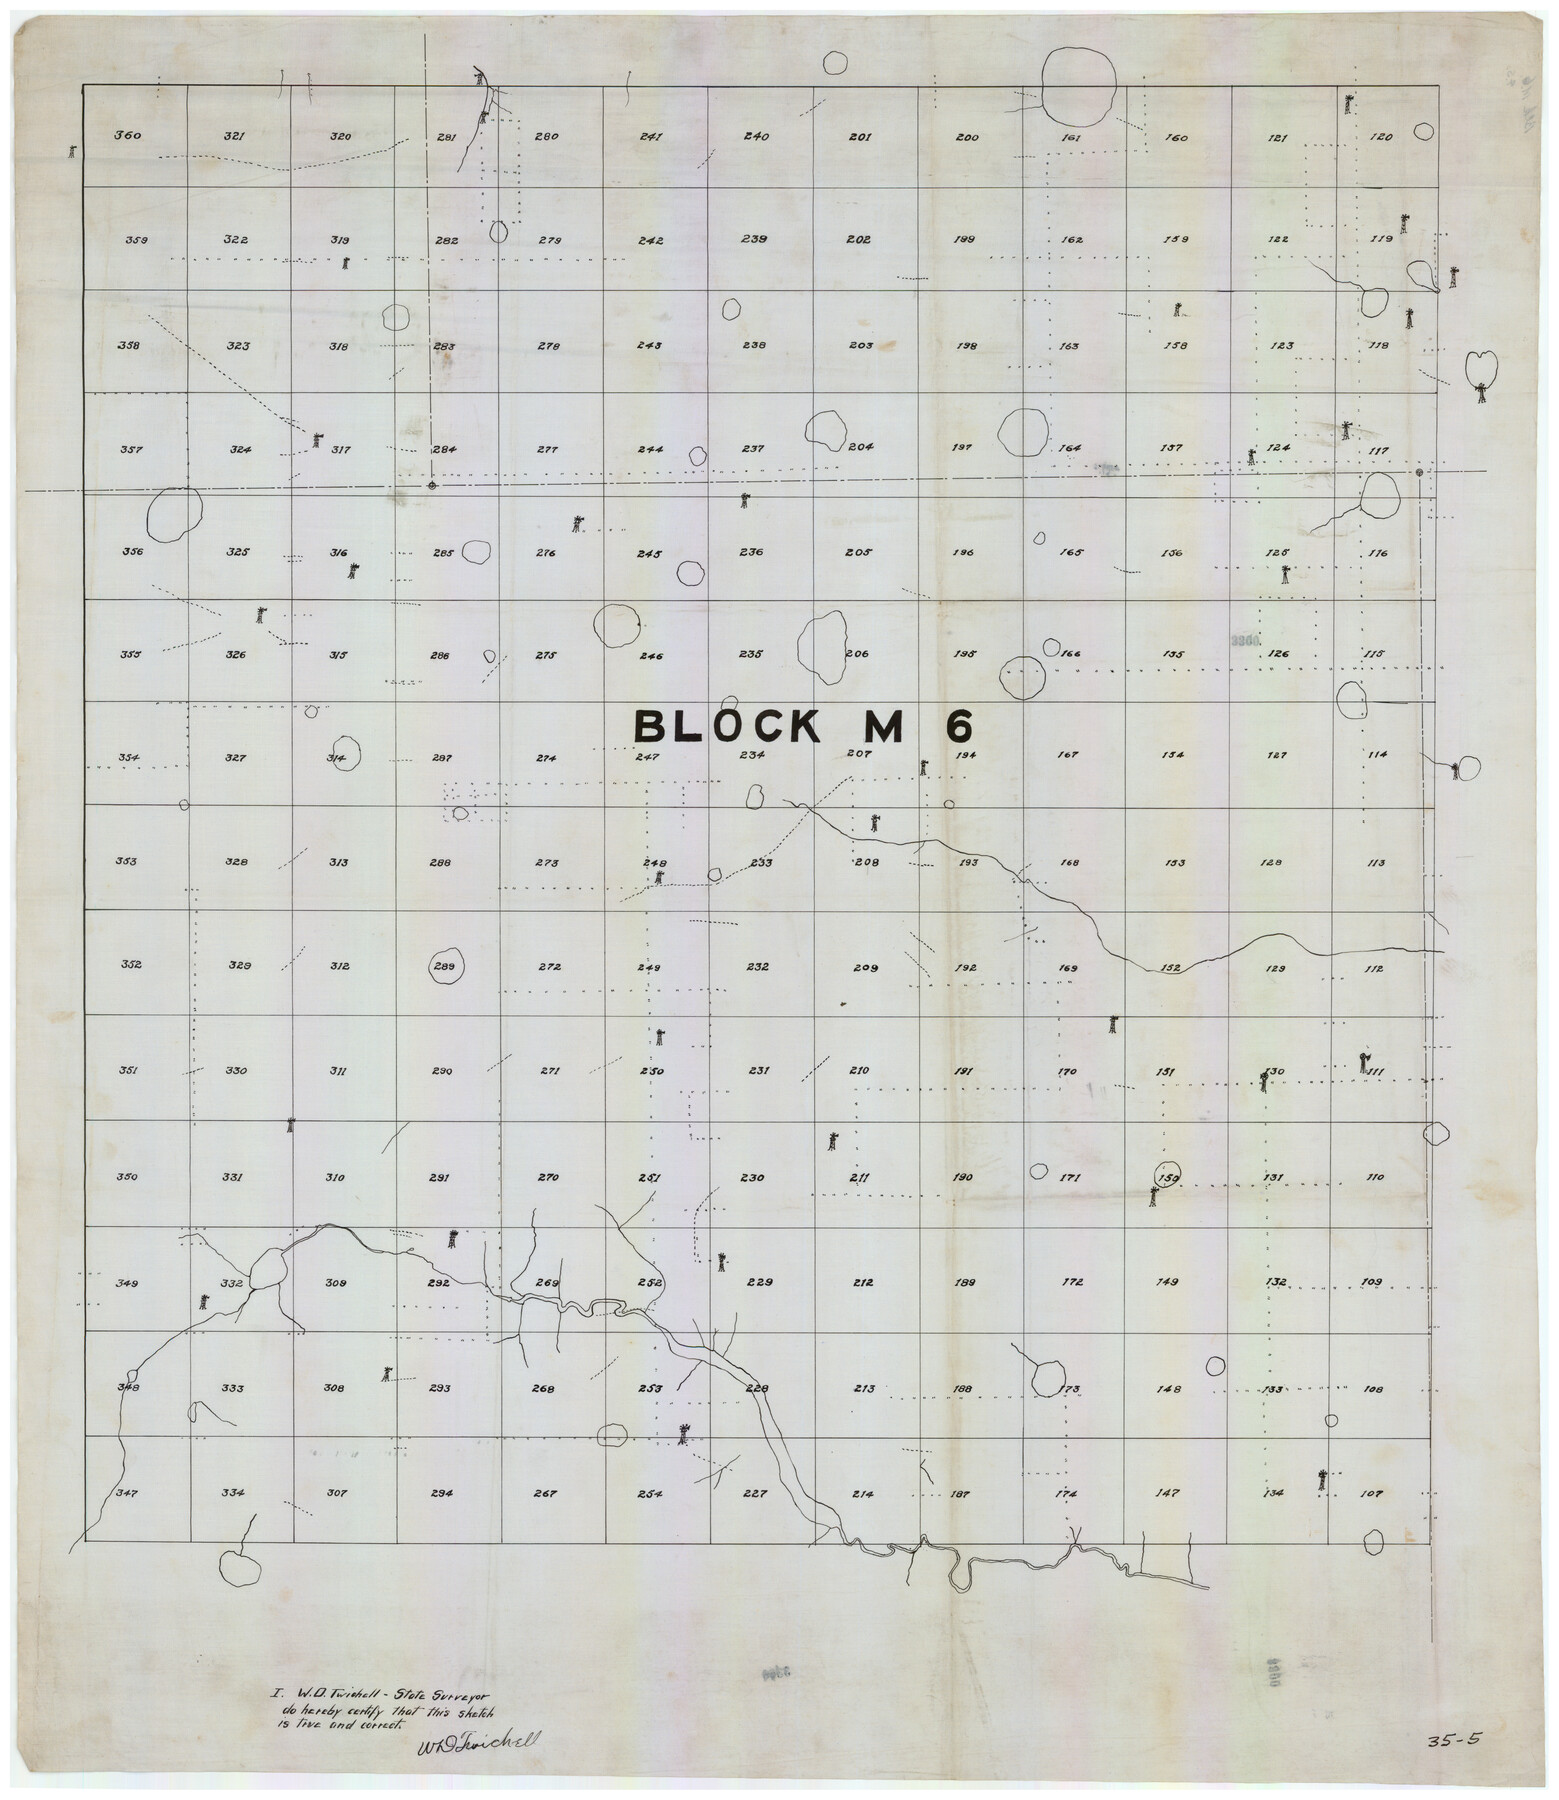 90394, [Stone, Kyle and Kyle Block M6], Twichell Survey Records